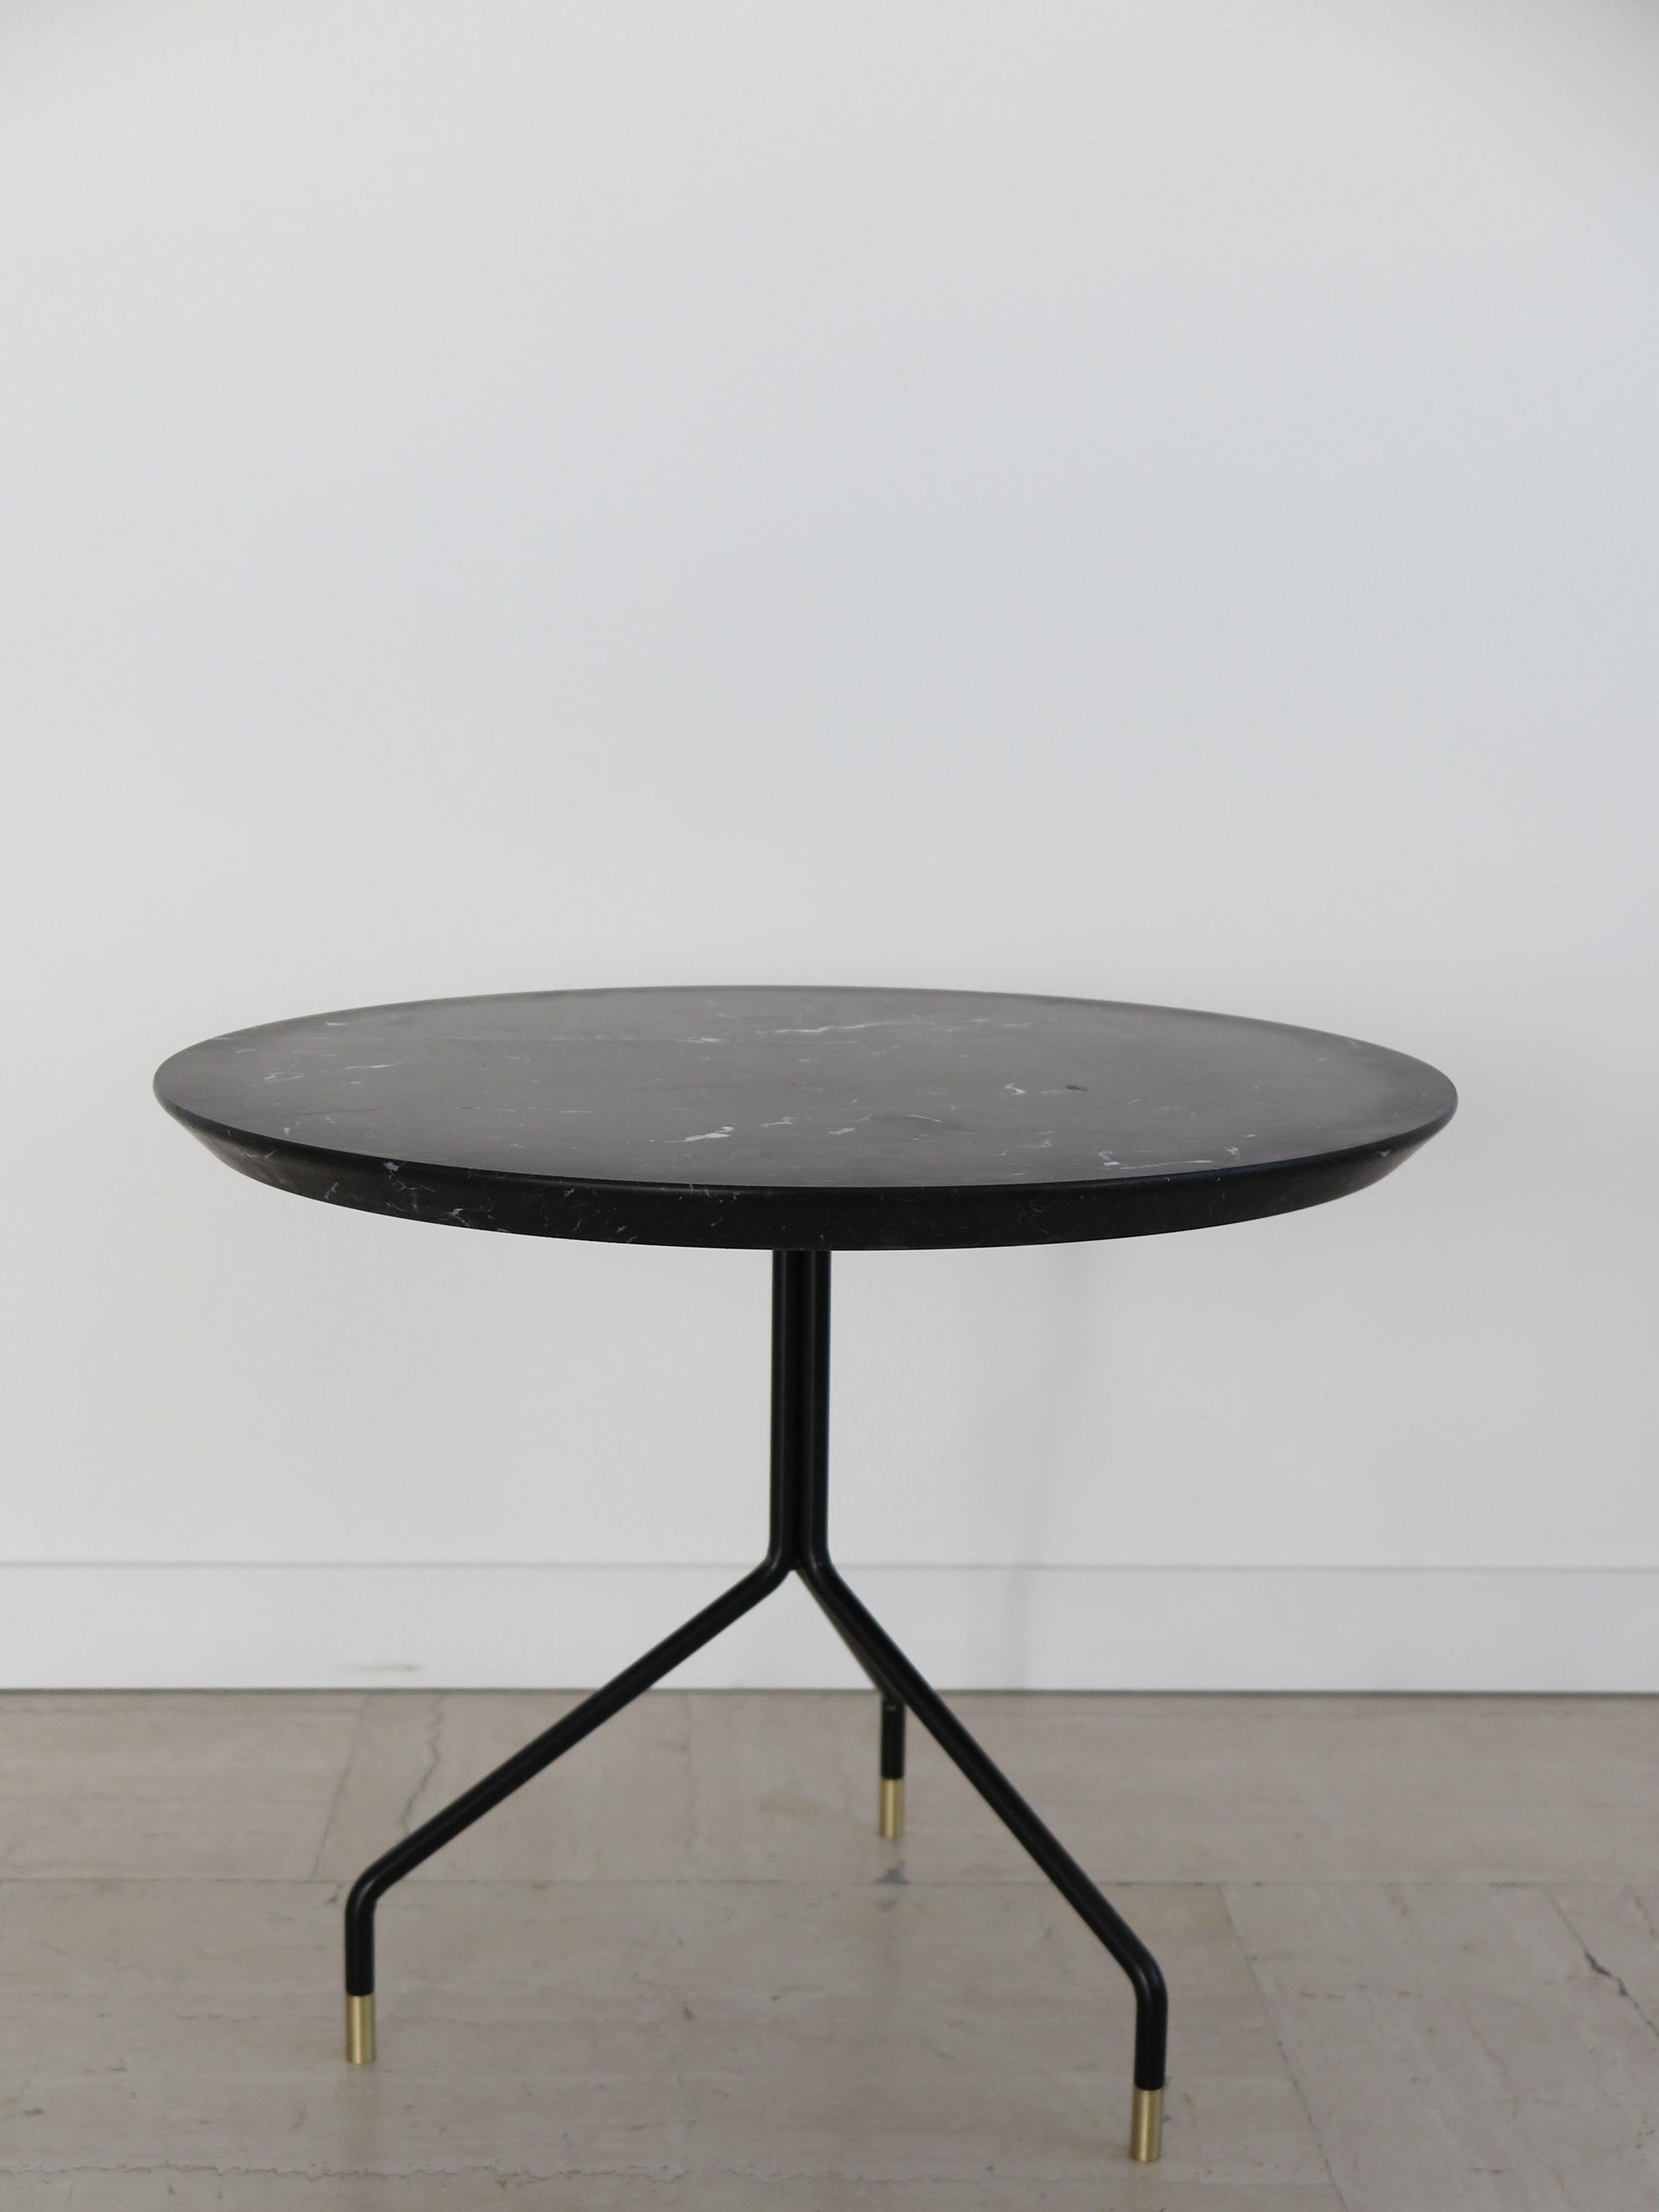 Italian contemporary round coffee table with matt Marquinia Black Marble top and black painted metal structure with brass terminals, new design Capperidicasa, limited edition.

Dimensions: diameter 60 cm - height 48 cm.